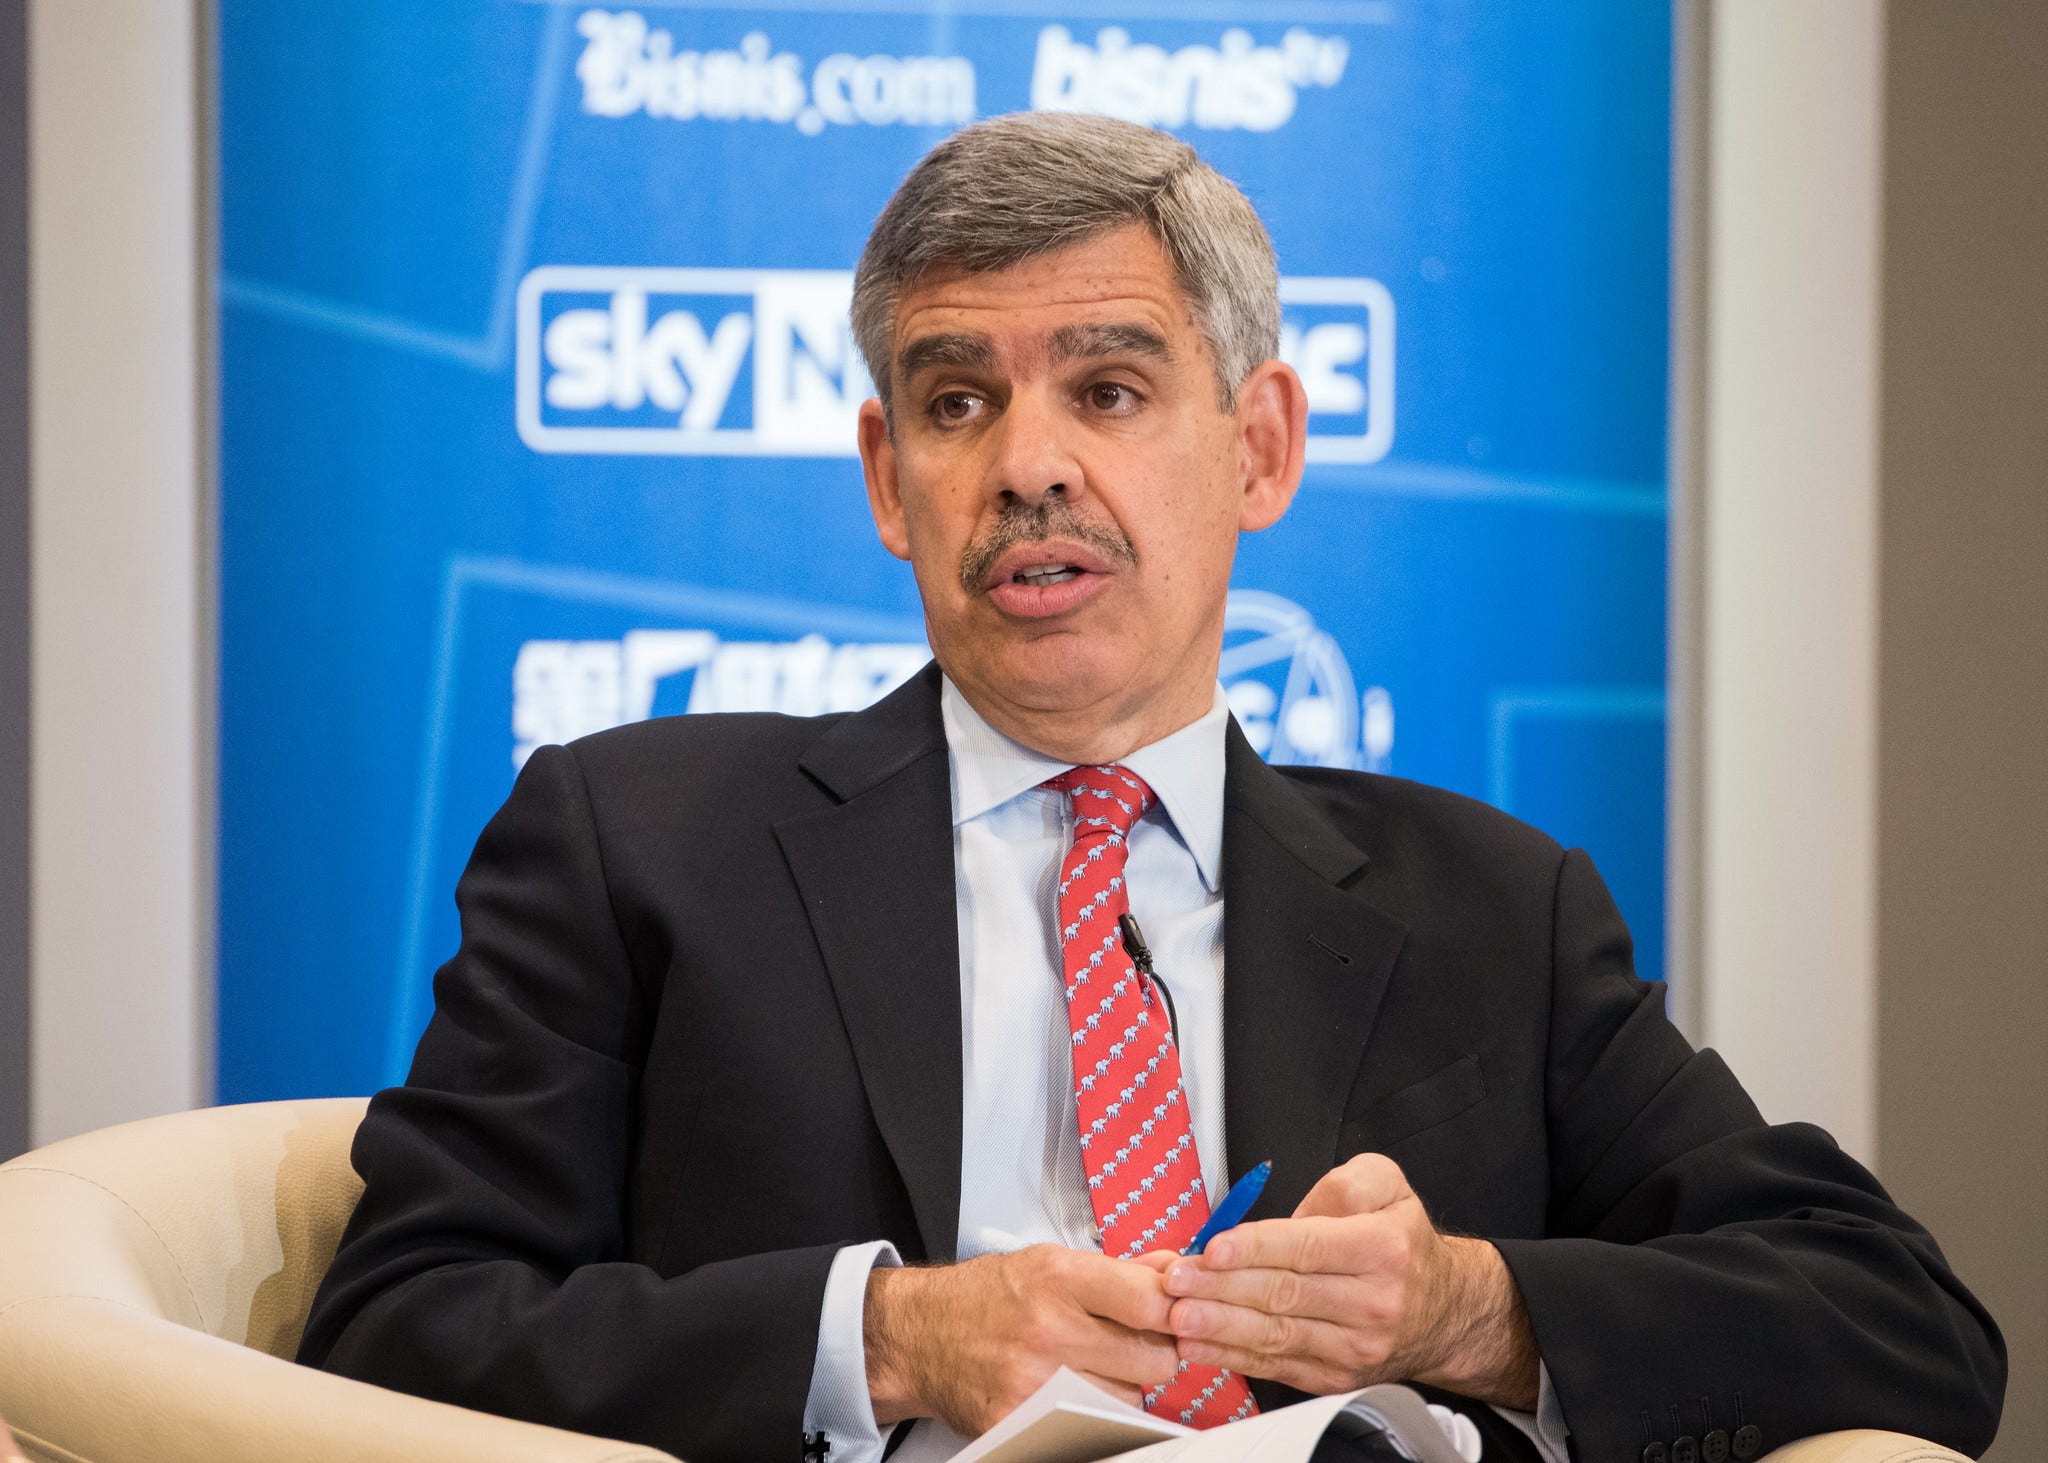 Top Economist El-Erian Thinks Bonds Warrant A 'More Differentiated' View As Credit Risk Is Far From Done